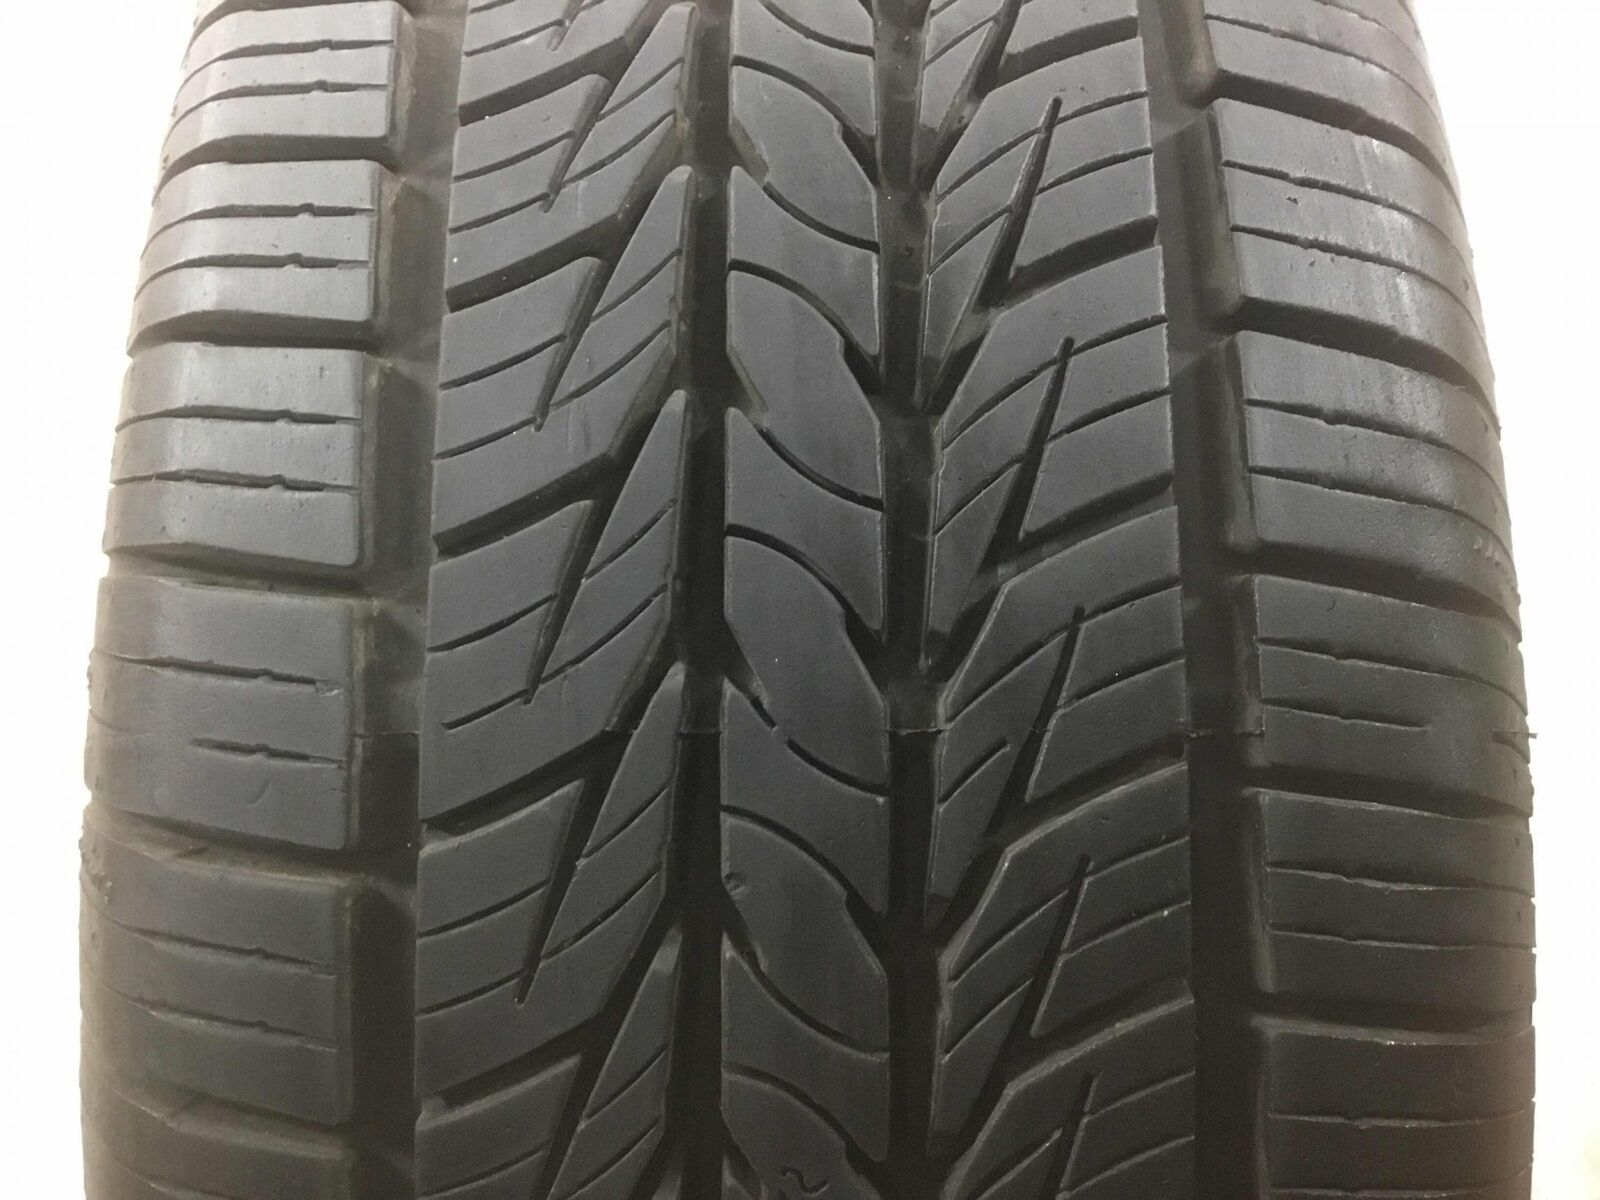 P225/65R17 General Tire Altimax RT43 102 H Used 9/32nds